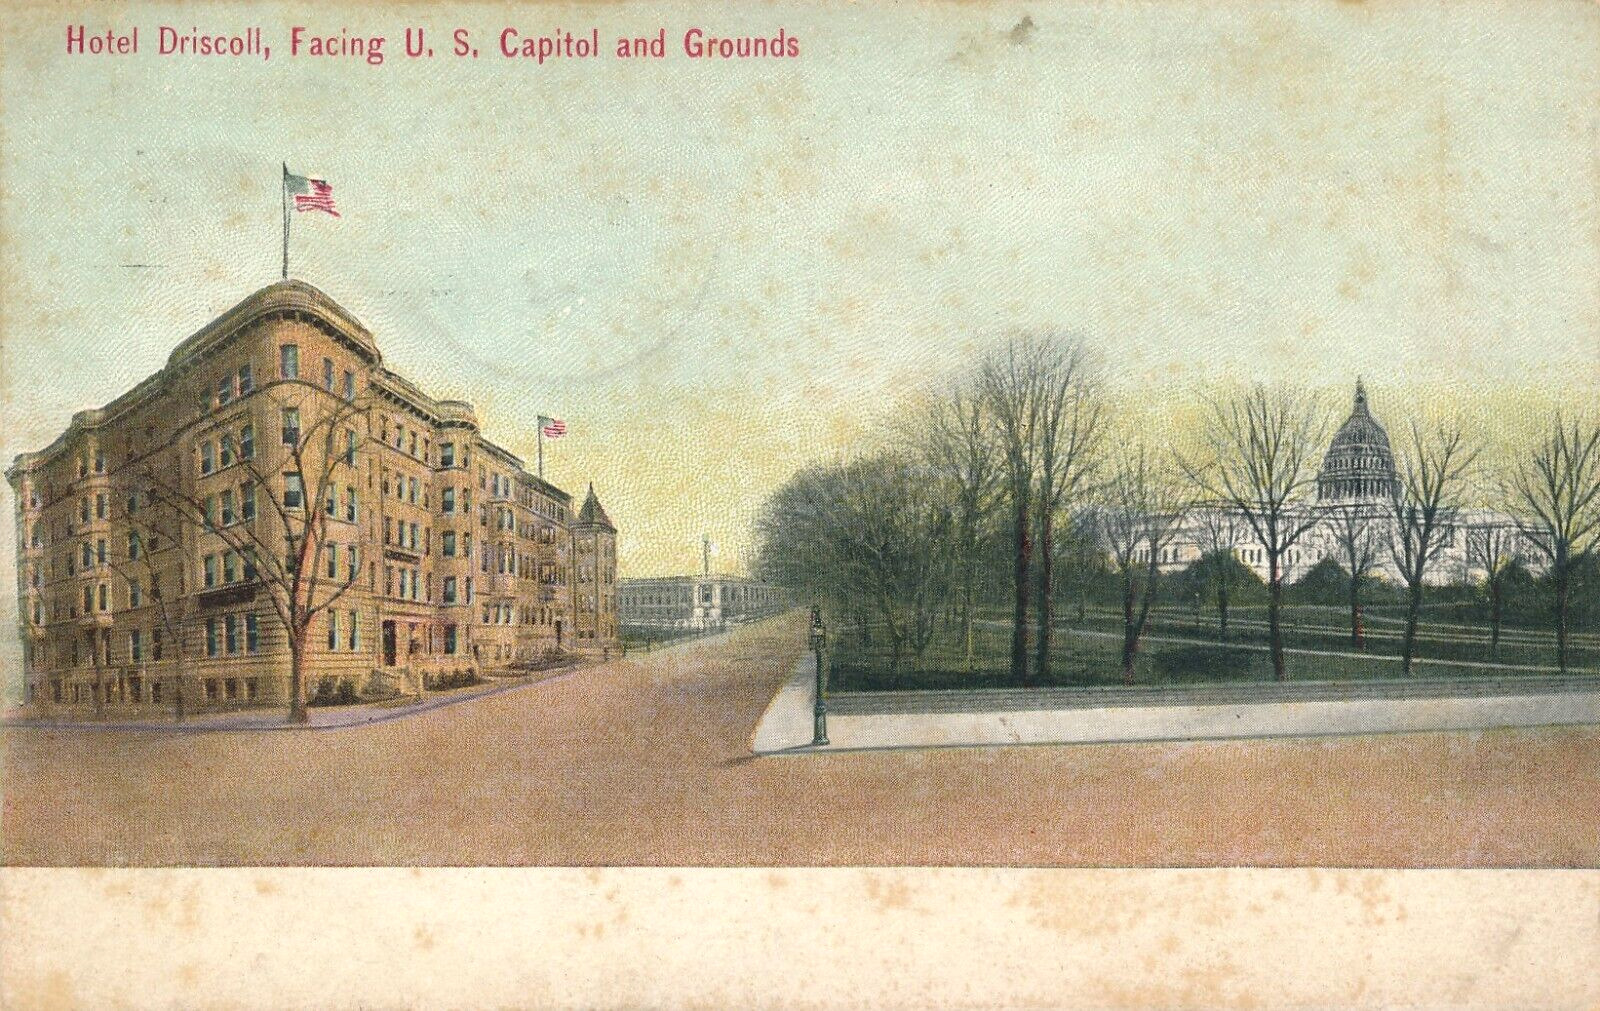 Hotel Driscoll near US Capitol and Grounds-Washington D.C. 1922 posted postcard